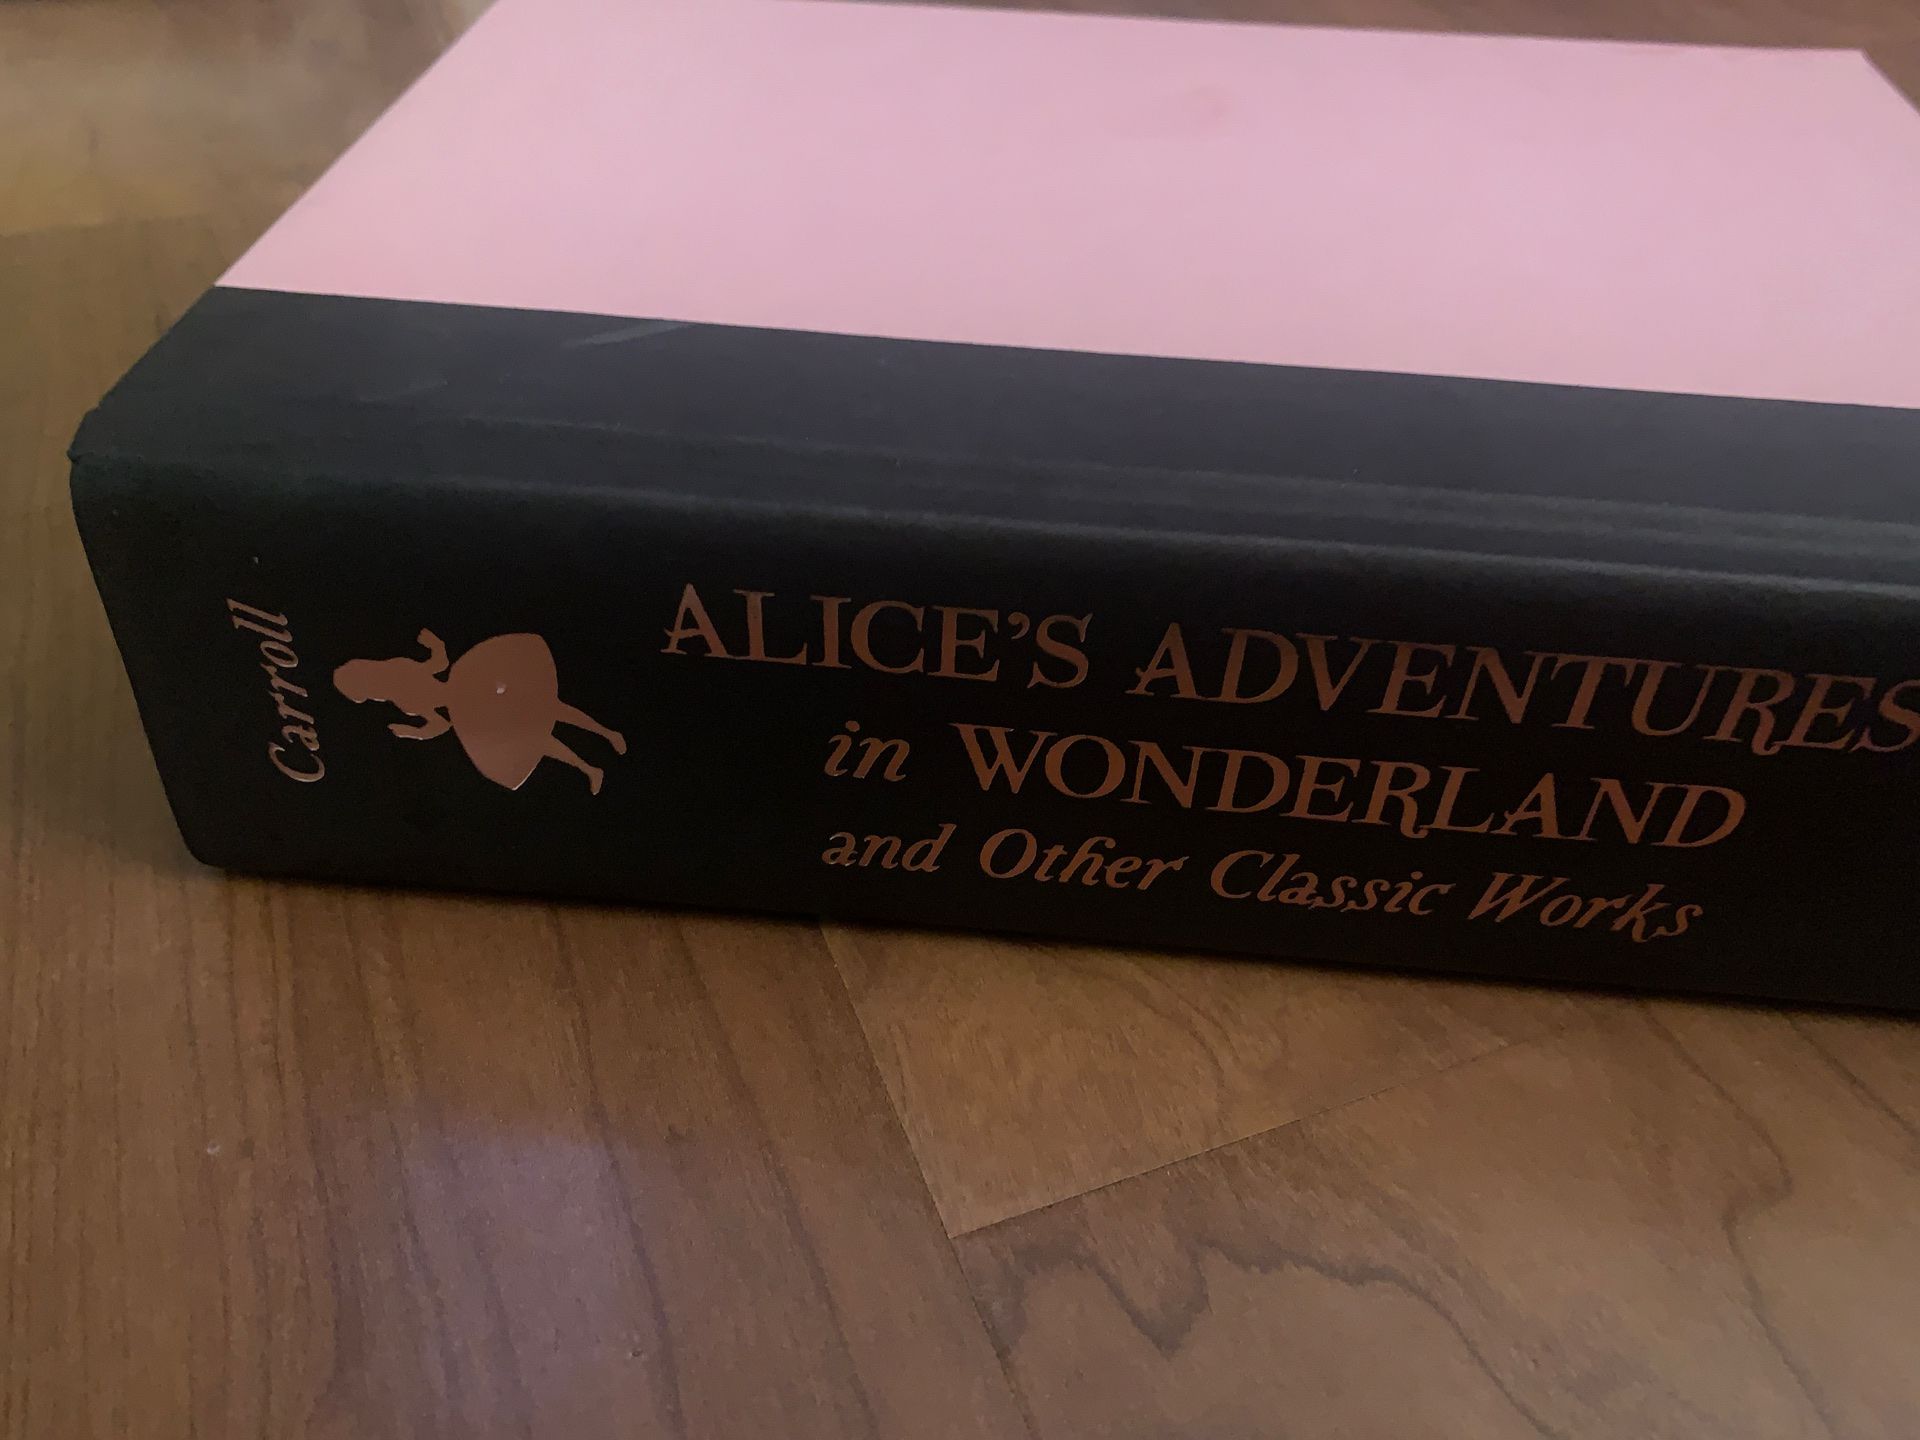 Alice’s adventures in wonderland and other classic works book